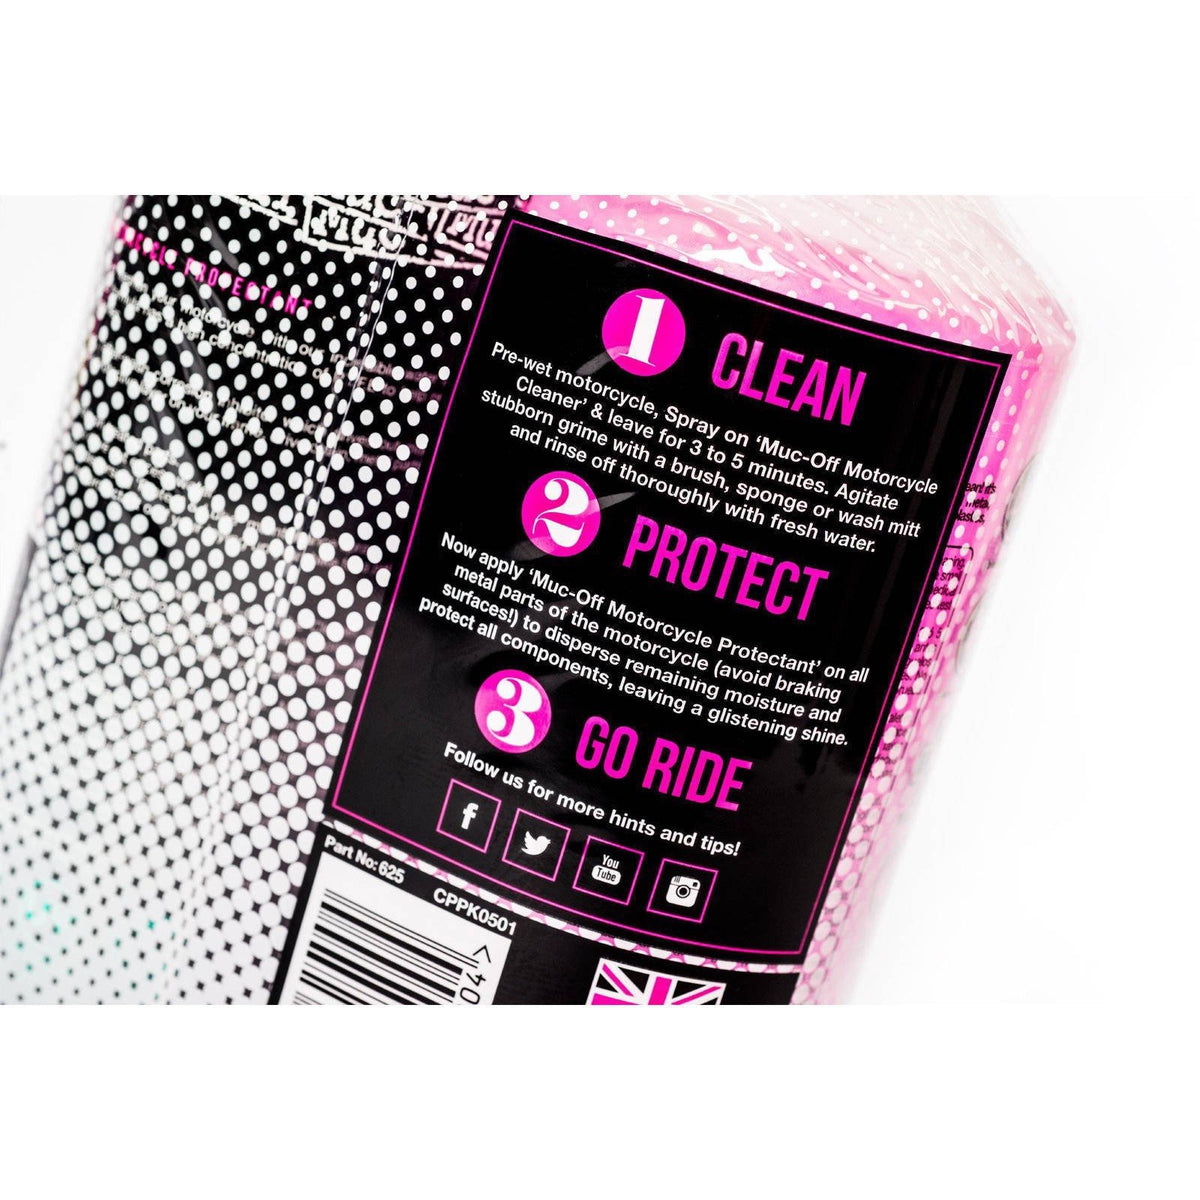 Muc-Off Motorcycle Care Duo Kit